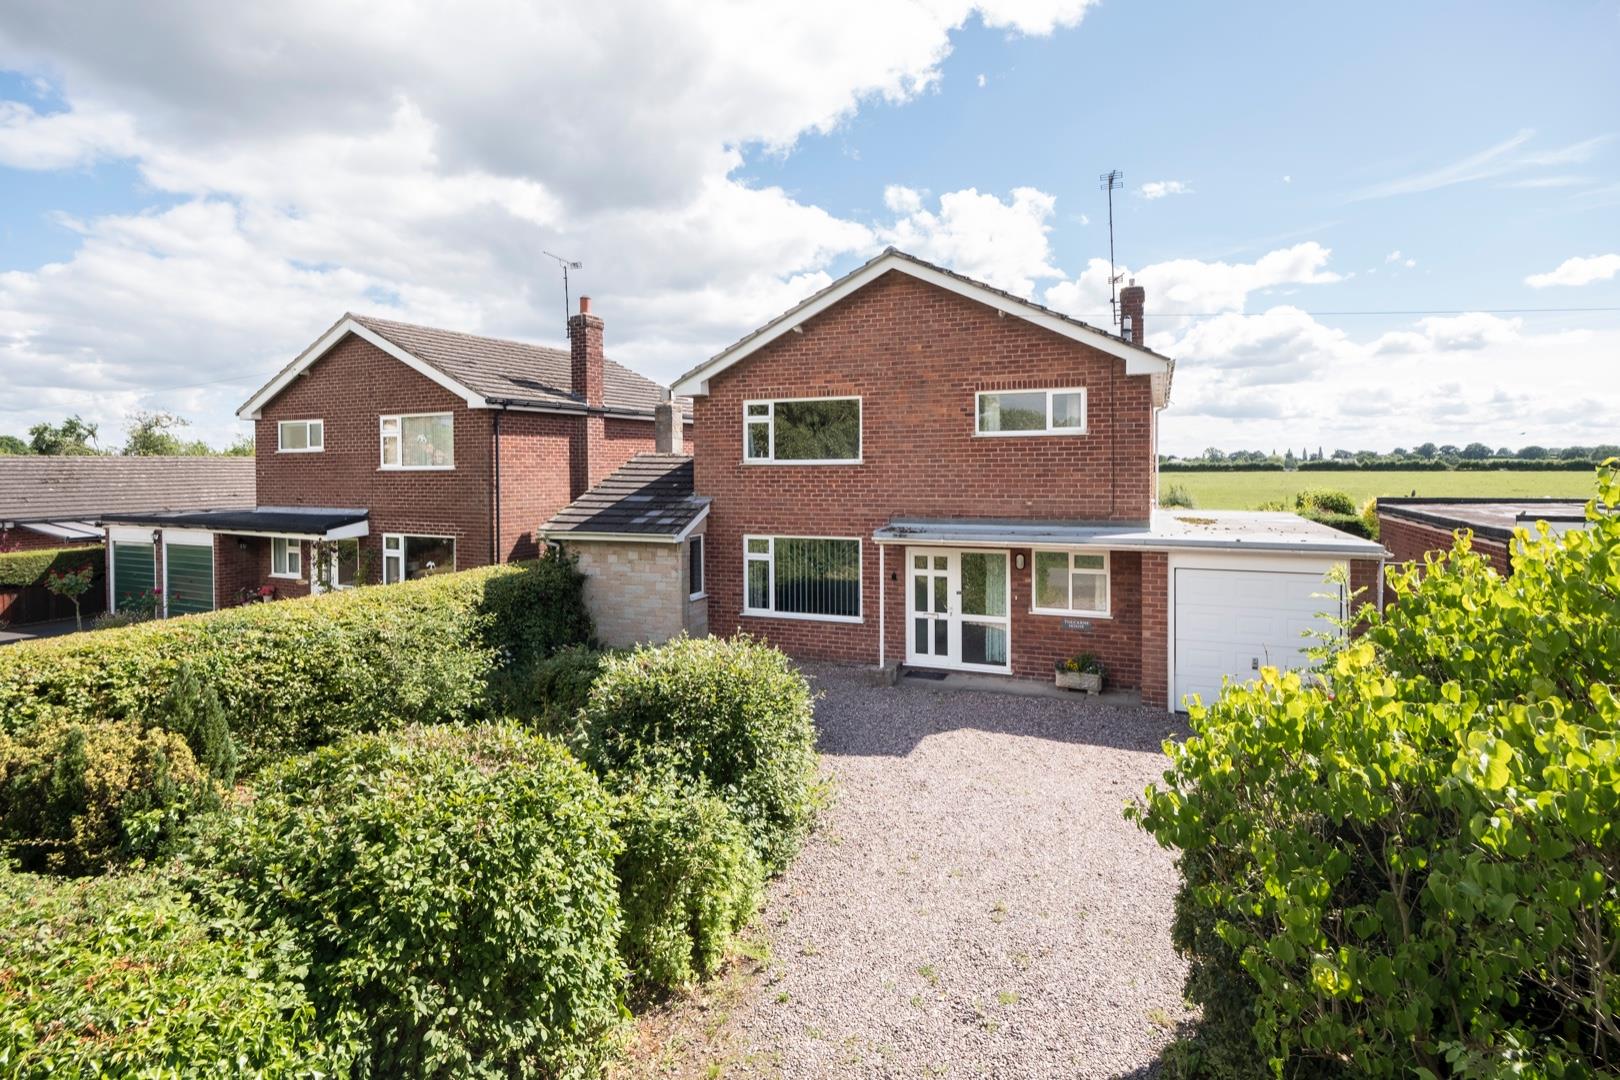 3 bedroom  Detached House for Sale in Oscroft